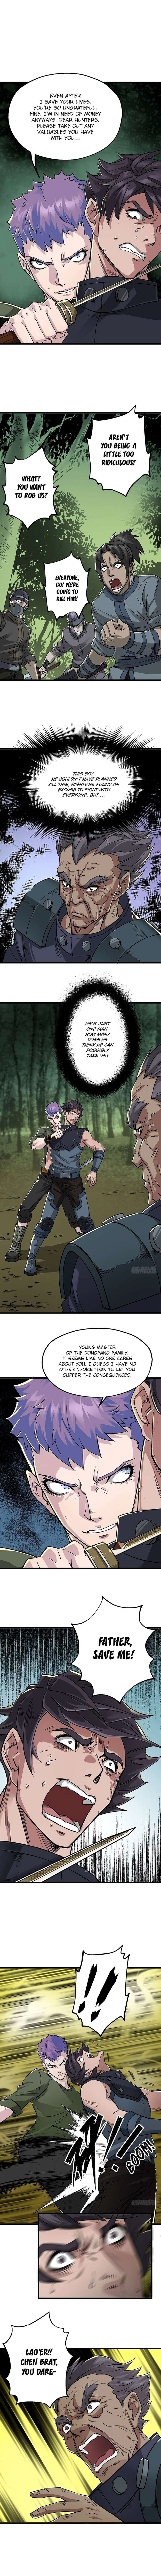 The Hunter Chapter 5 page 6